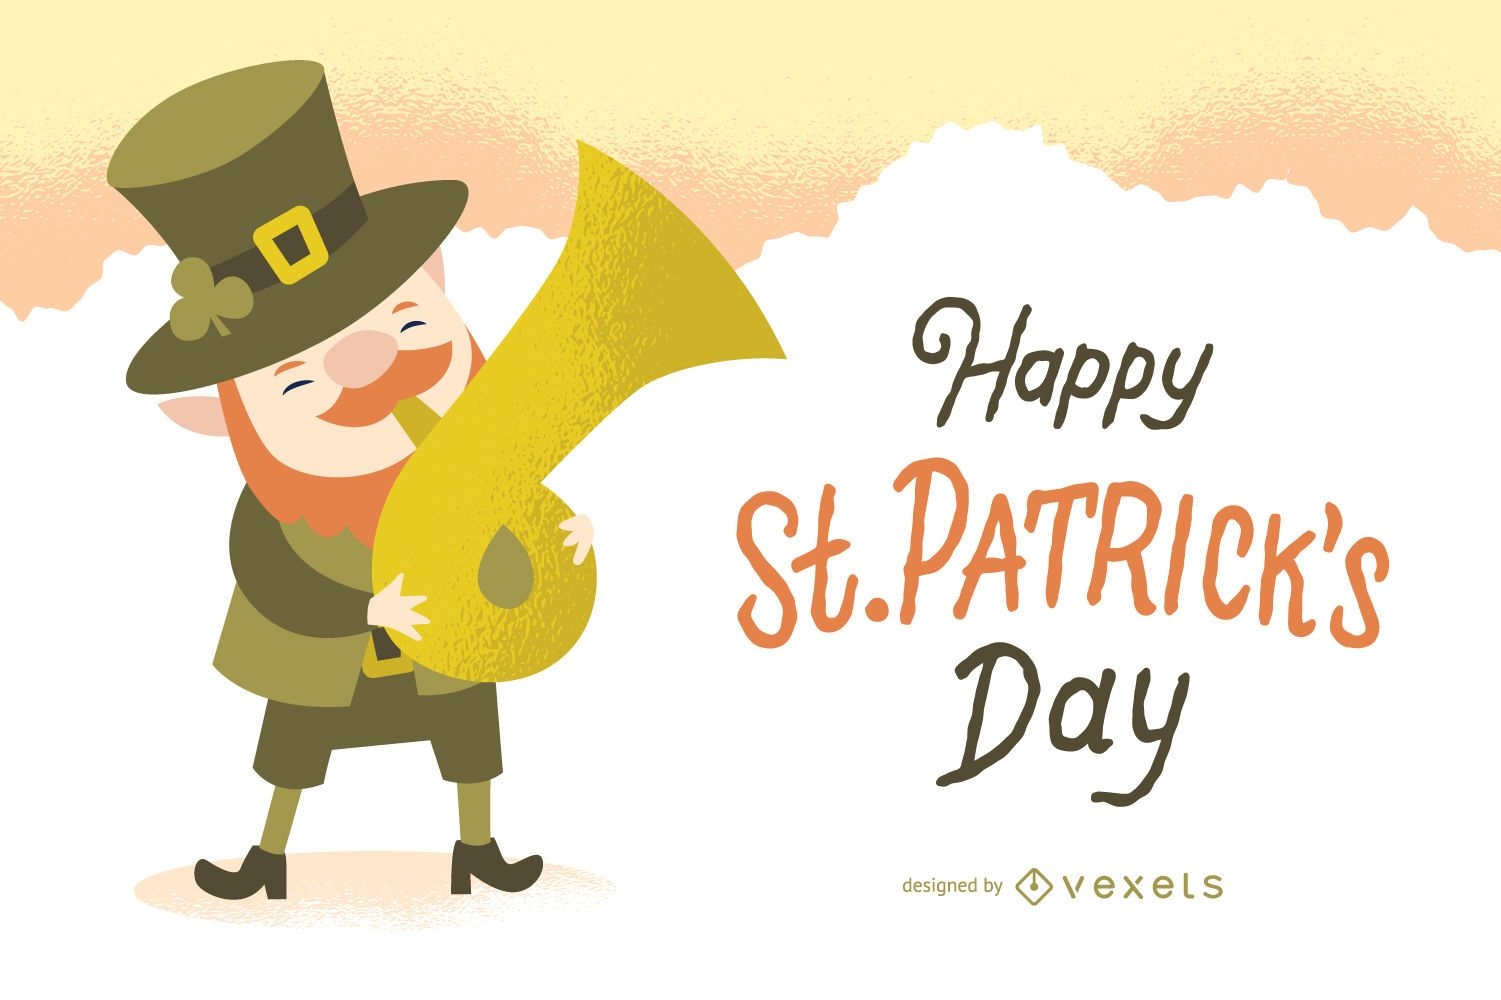 St Patrick's day poster